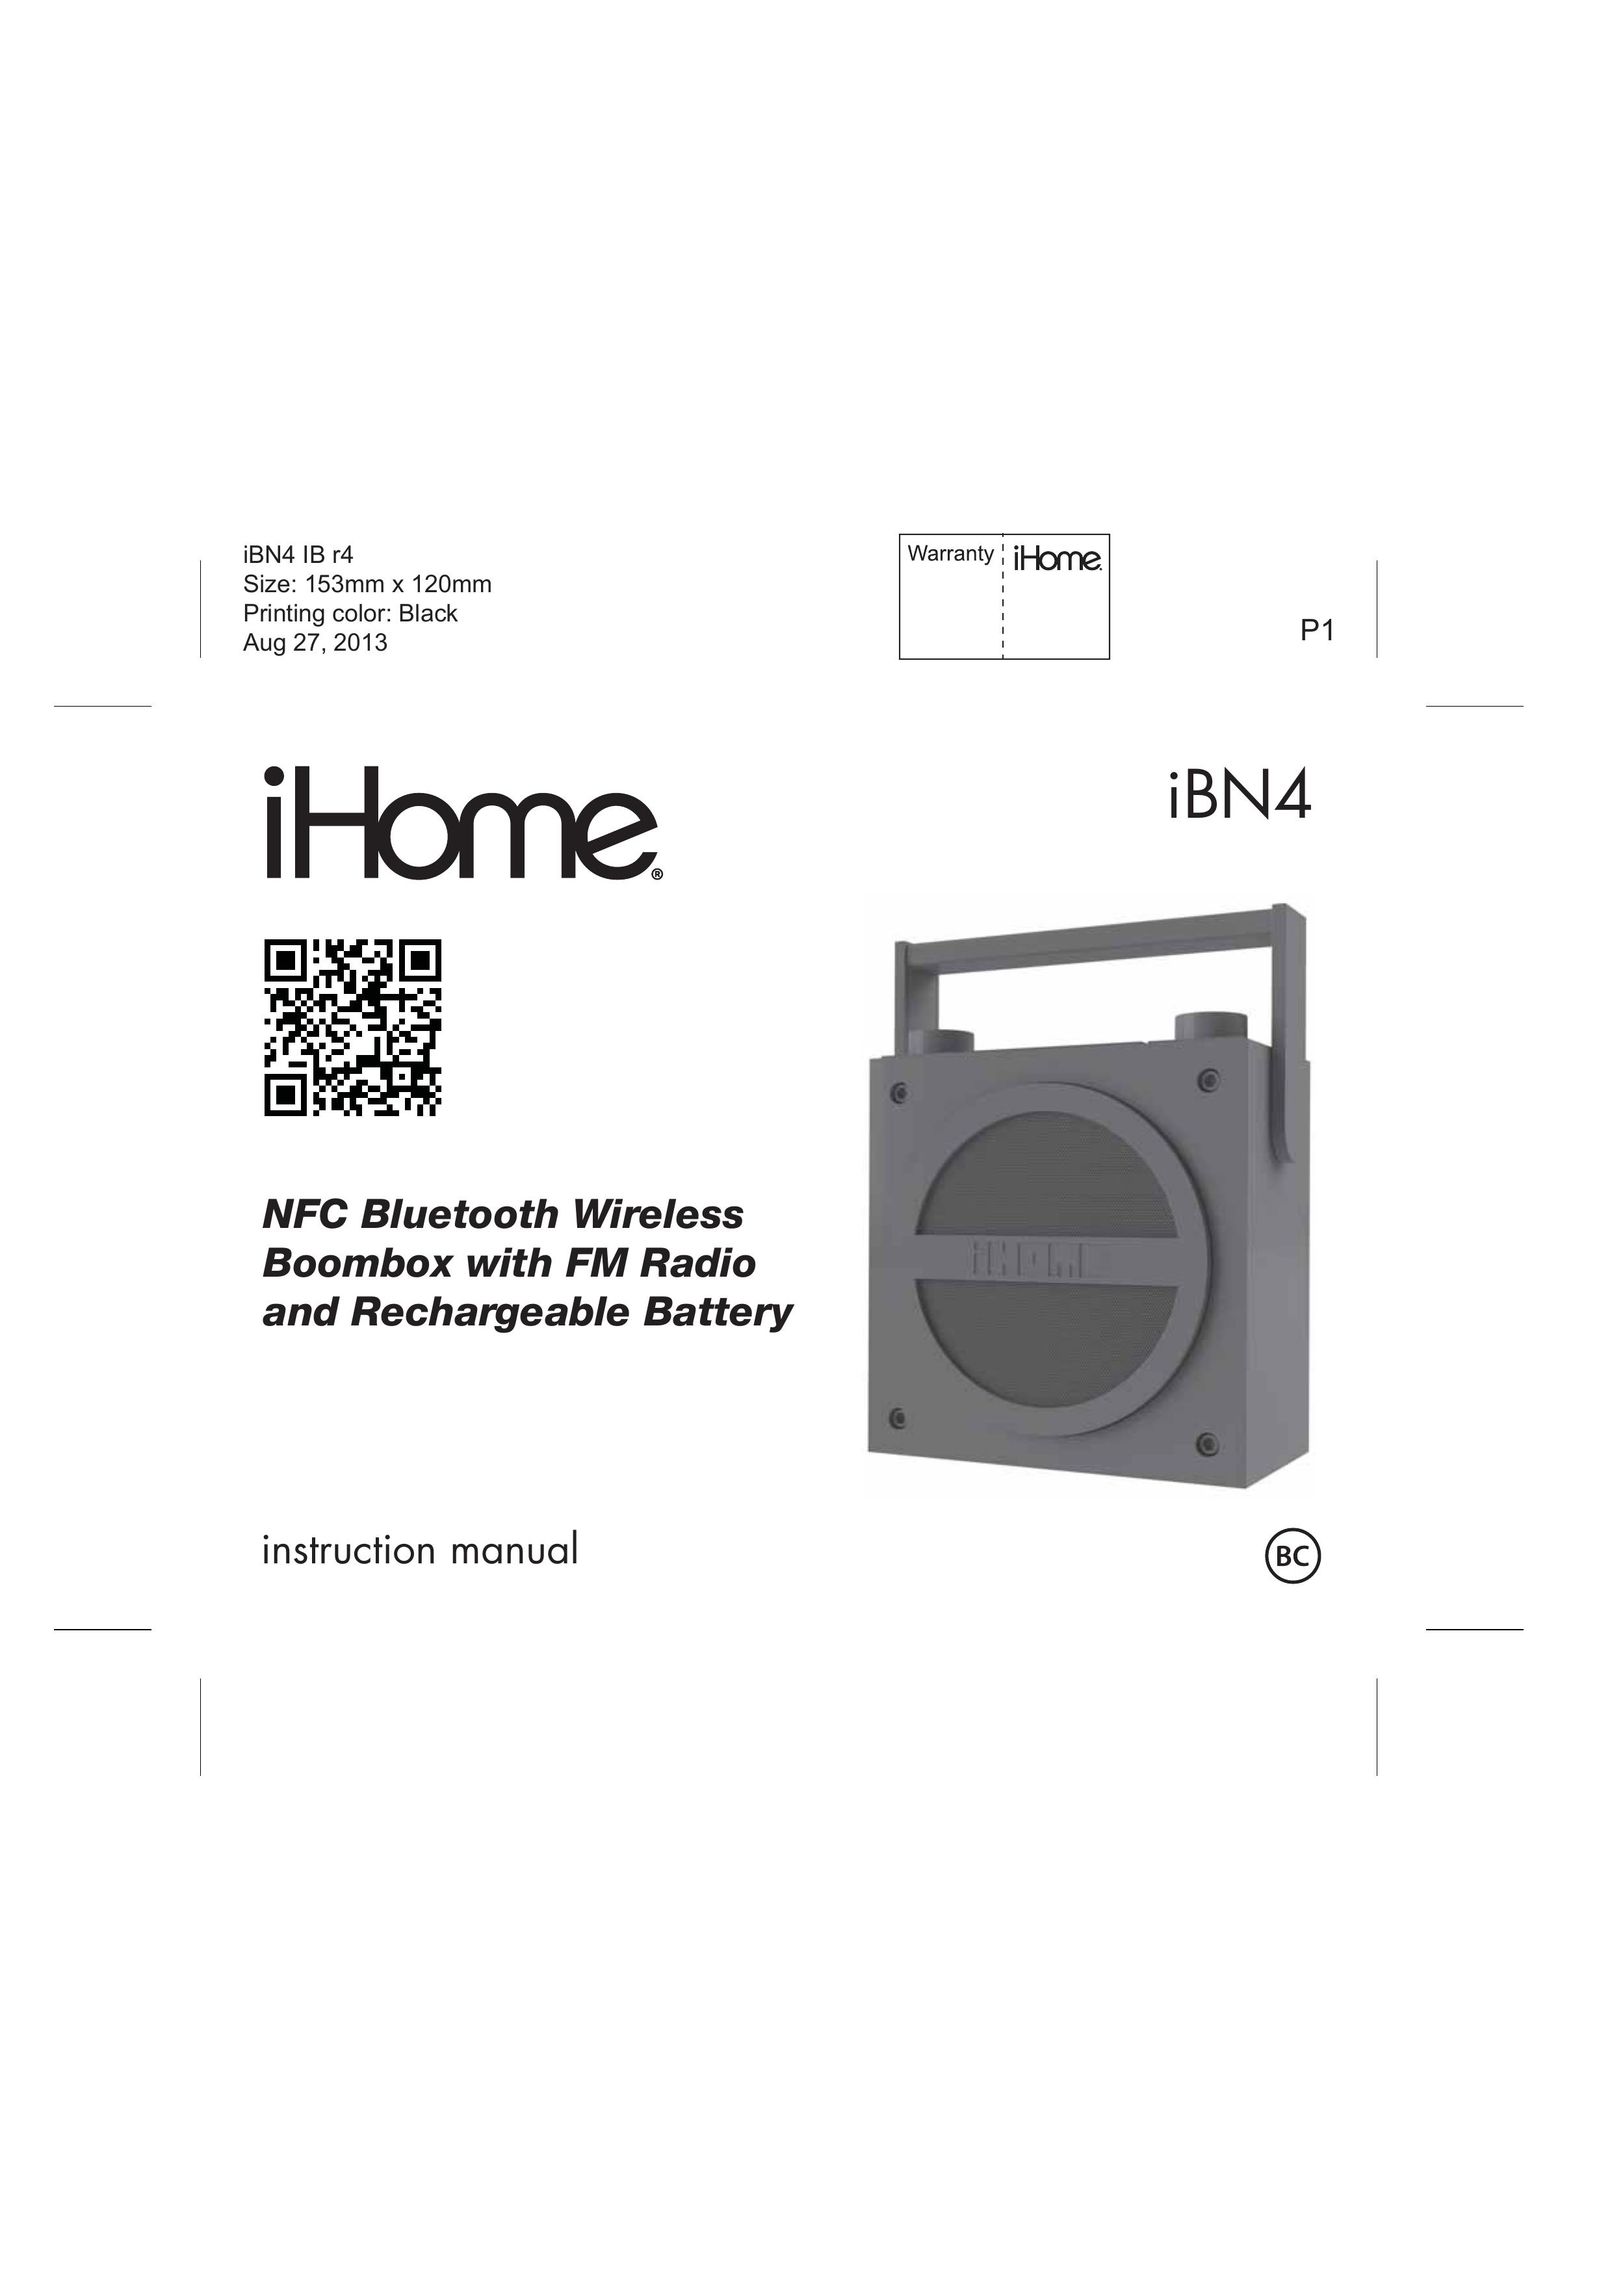 iHome iBN4 Portable Stereo System User Manual